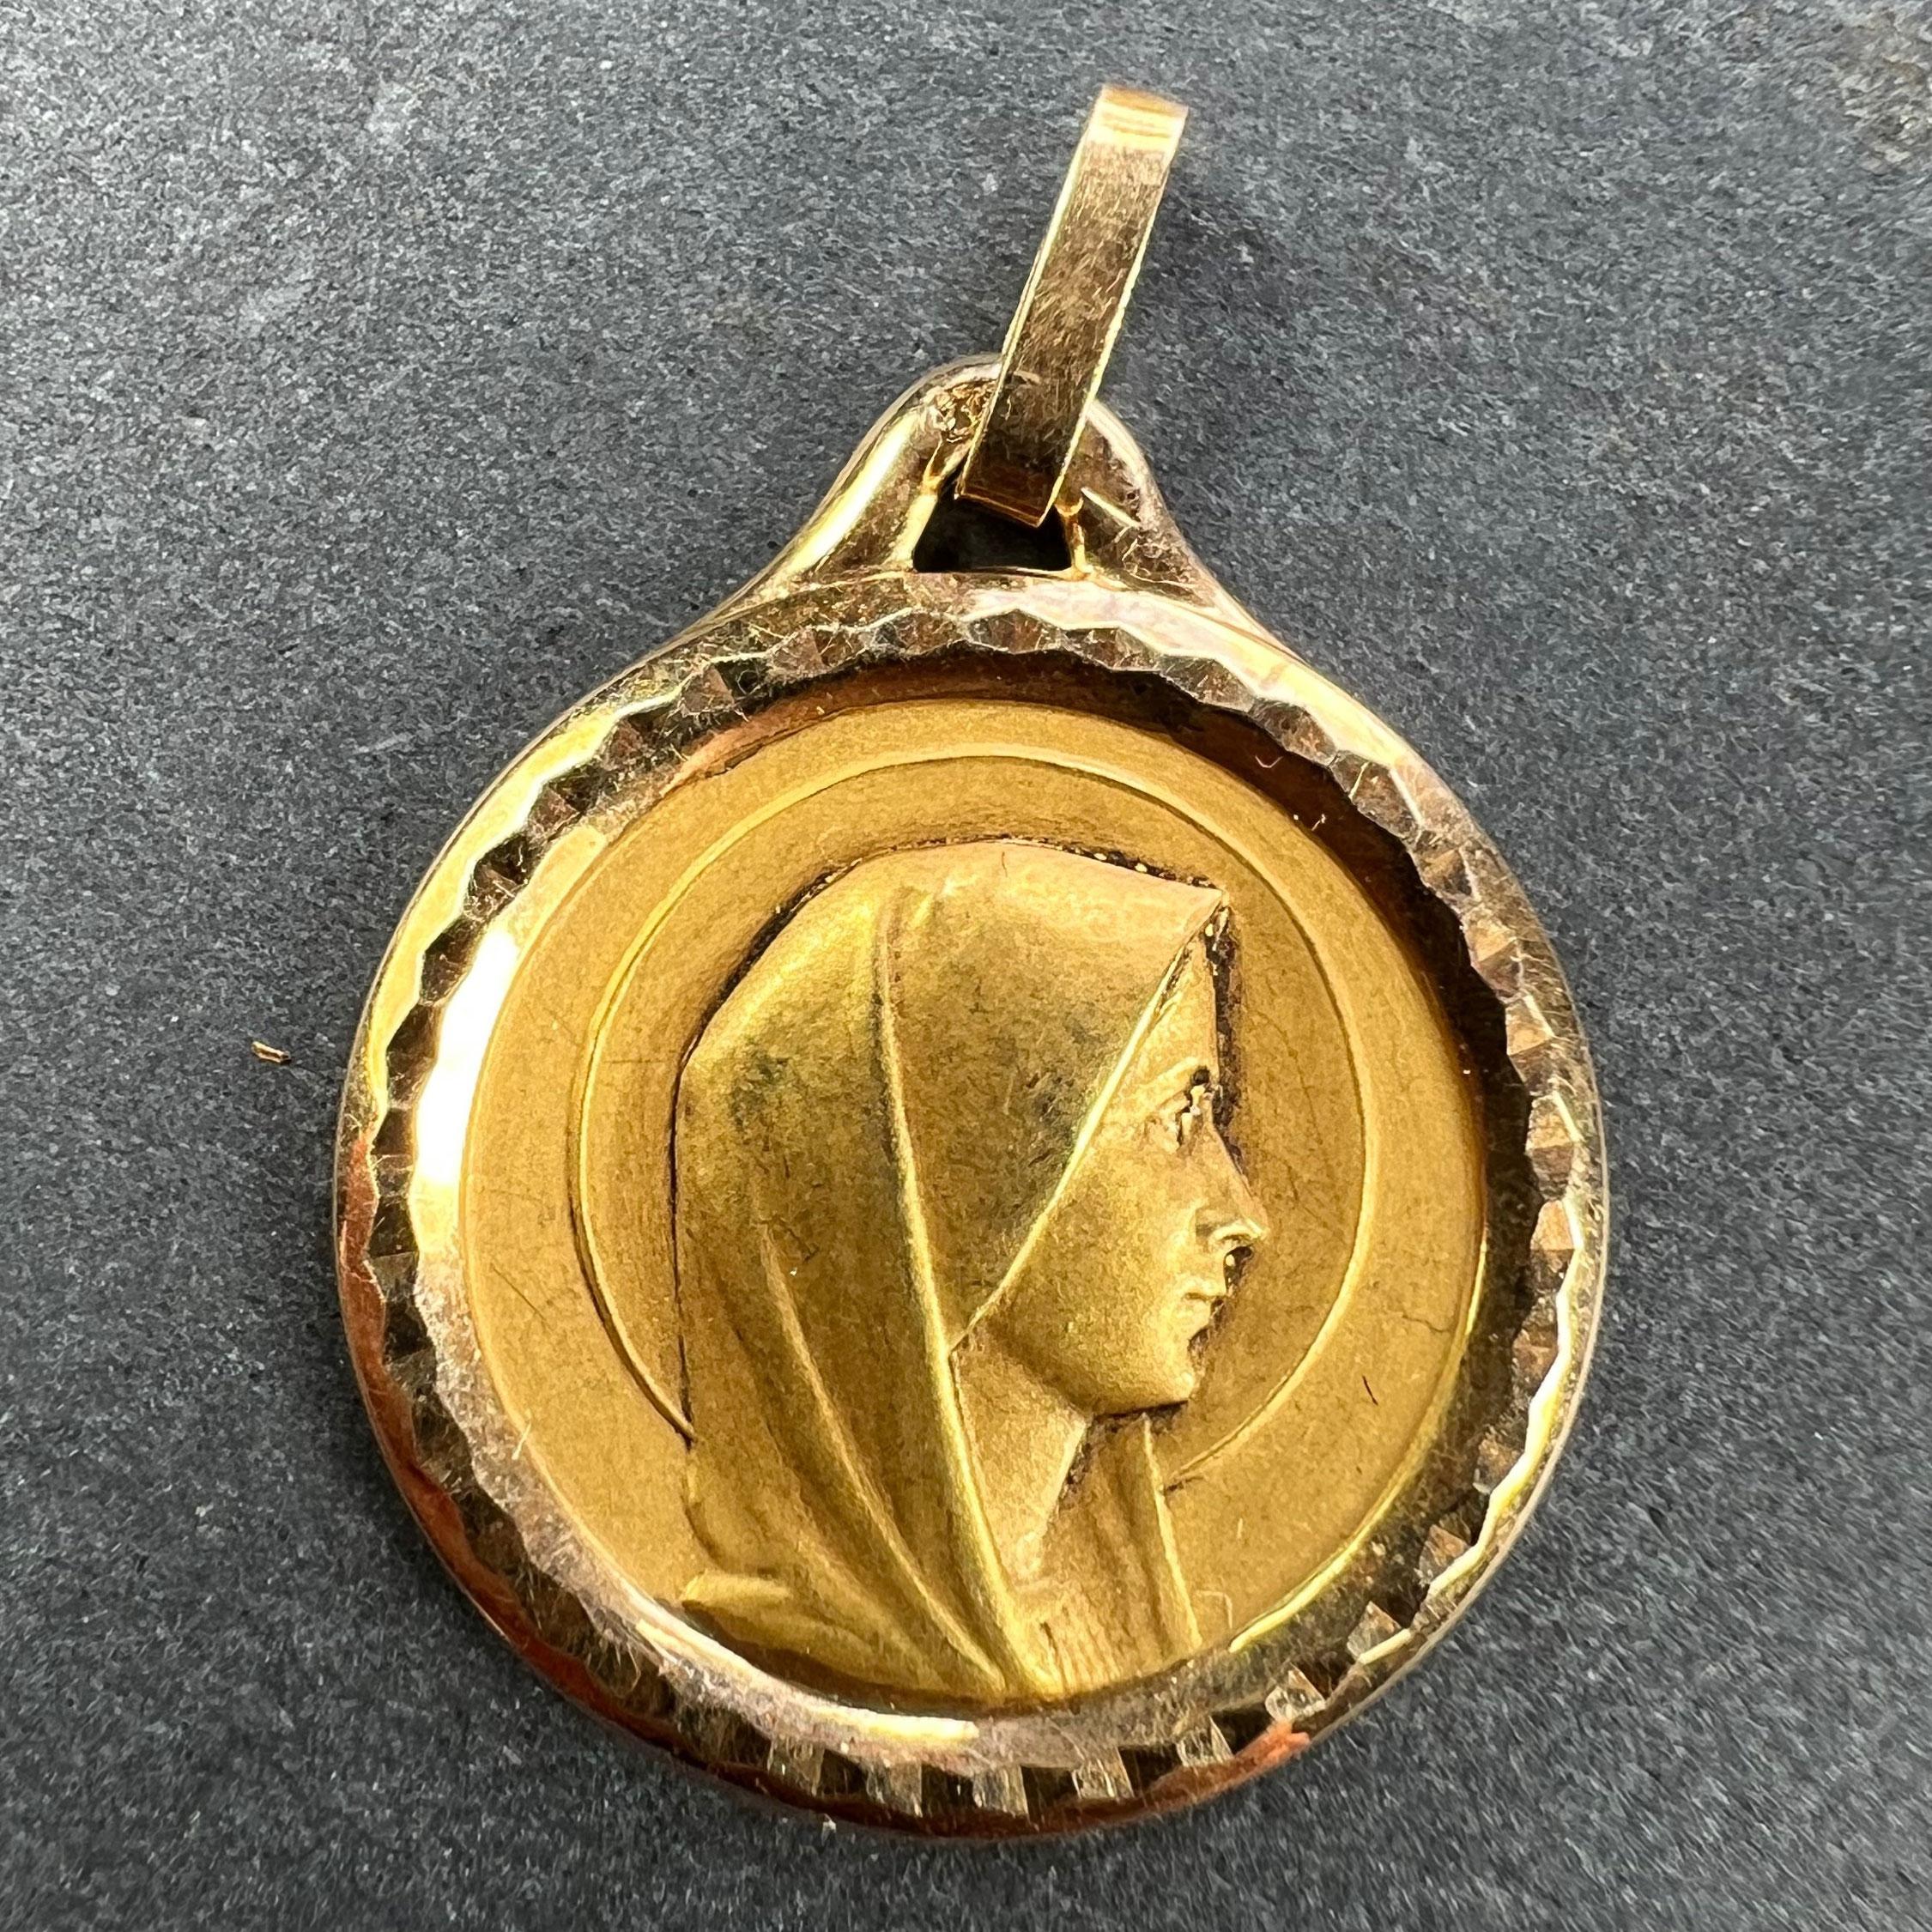 A French 18 karat (18K) yellow gold pendant designed as a round medal depicting the Virgin Mary in profile with a halo. Stamped with the eagle’s head for French manufacture and 18 karat gold with an unidentified maker's mark.

Dimensions: 2.1 x 1.8